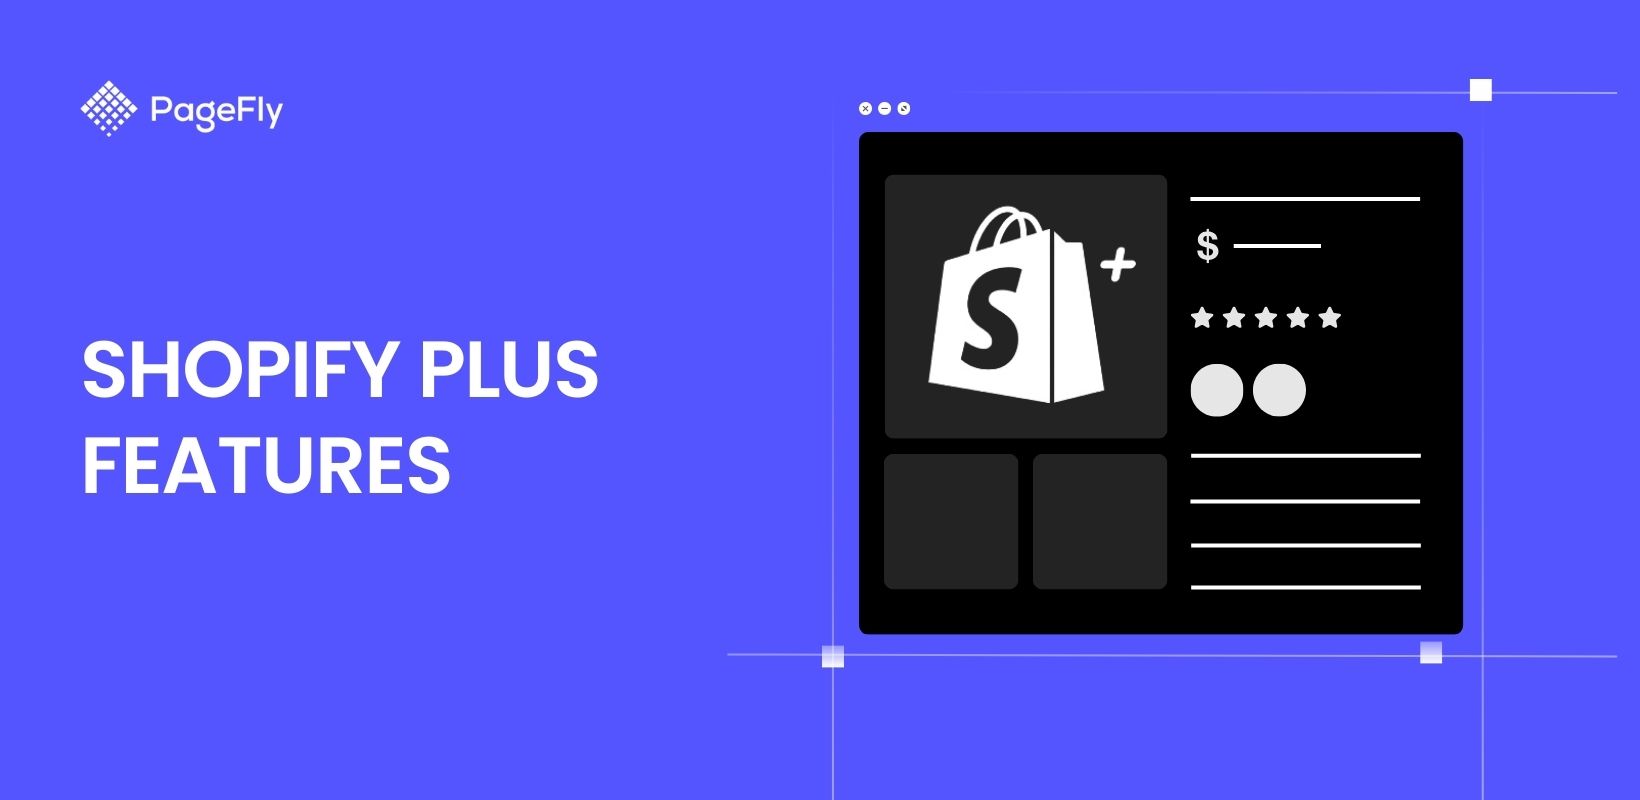 Limitless Potential: Shopify Plus Features To Grow Your Business